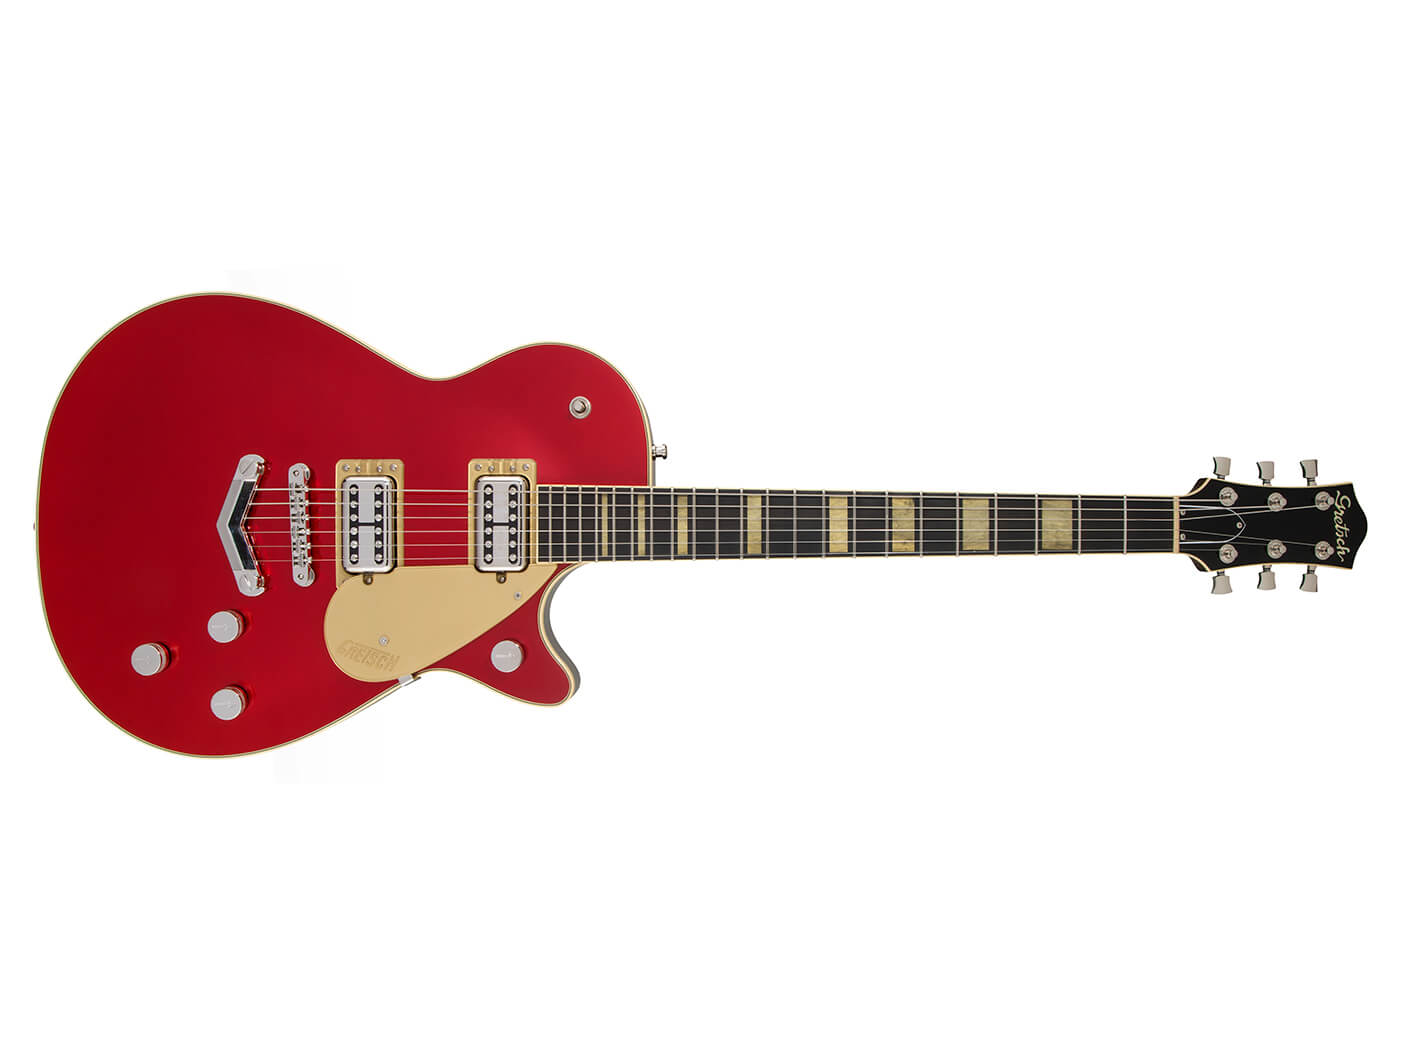 The Gretsch G6228 Players Edition Jet BT in Candy Apple Red